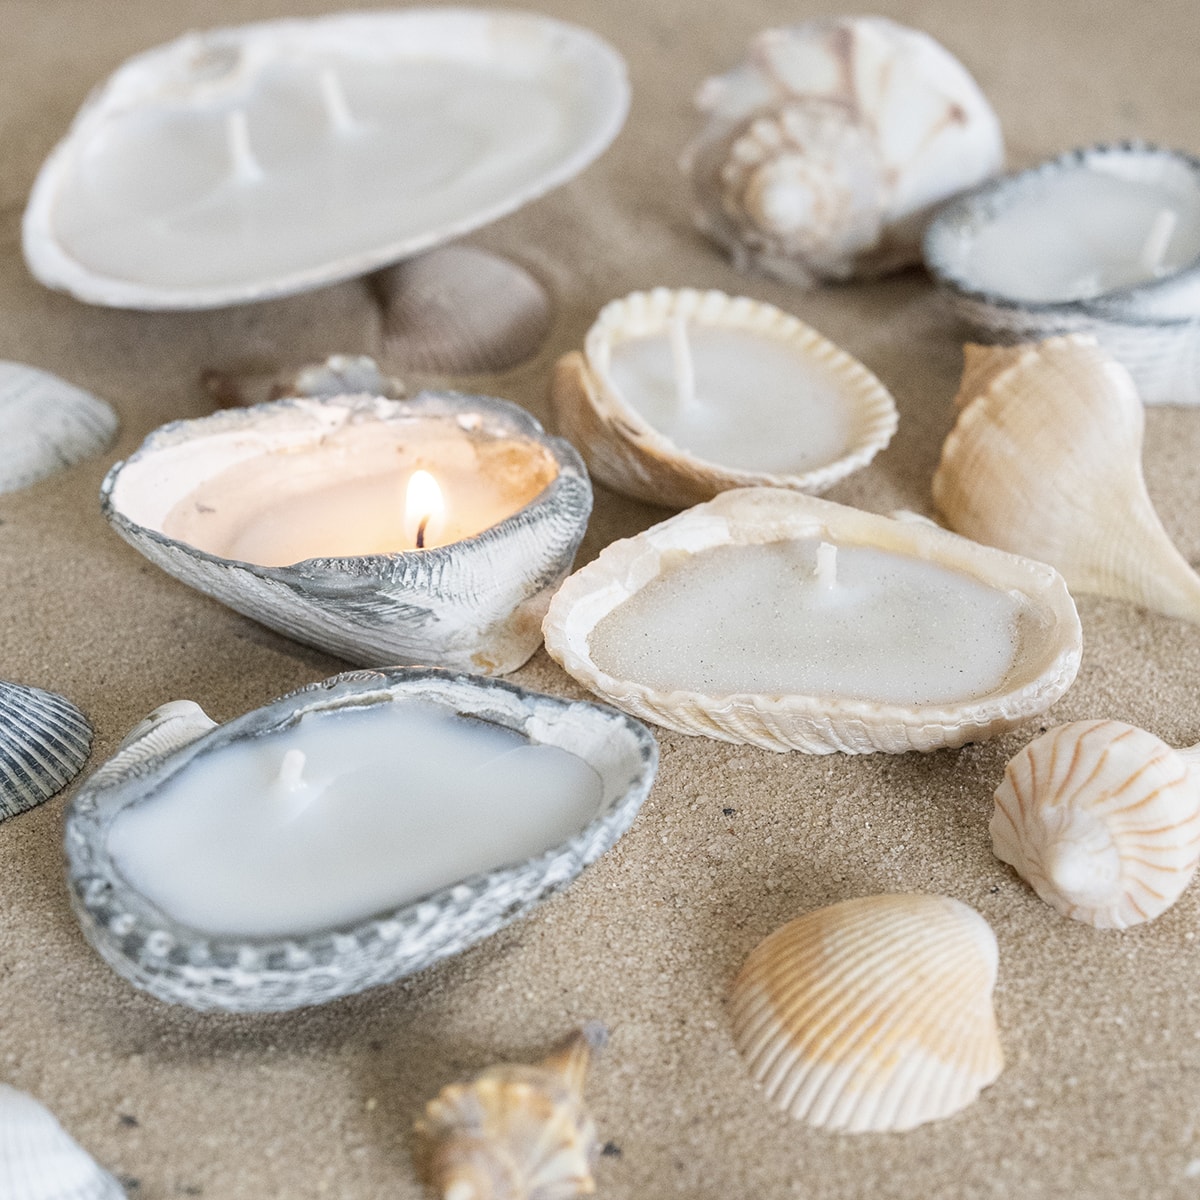 How to make DIY tea light candles in seashells the easy way